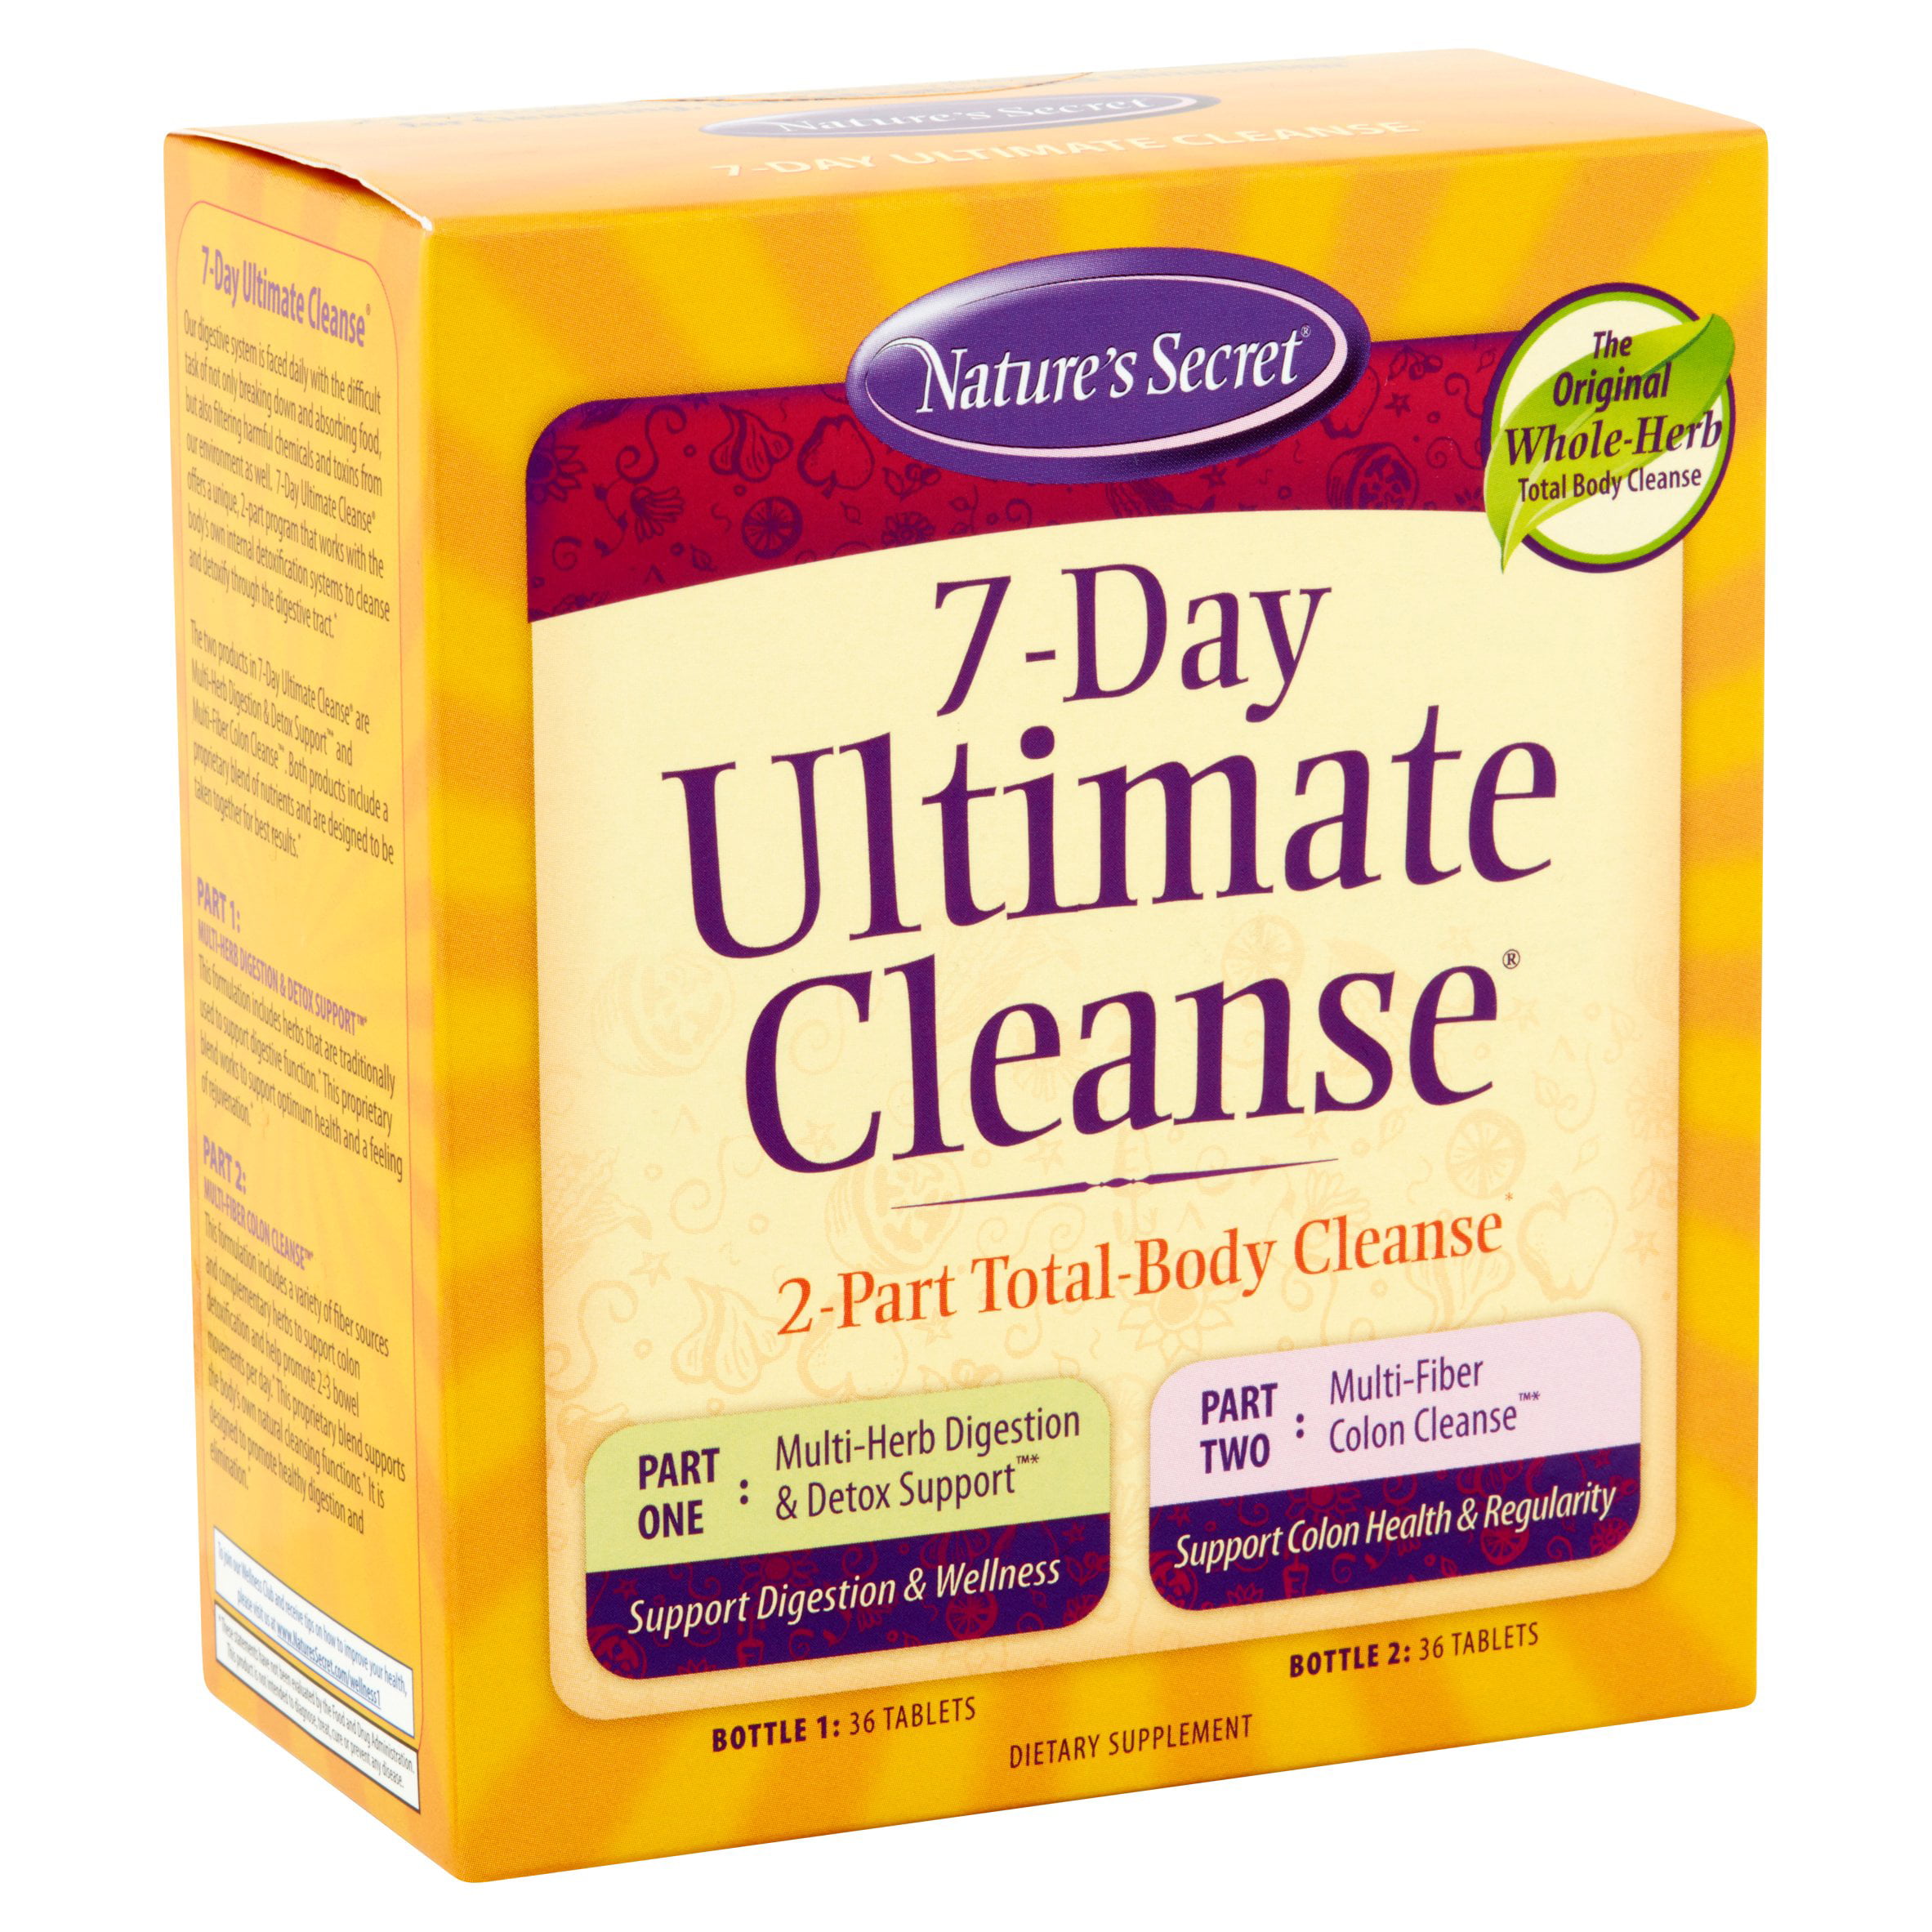 Body cleanse. Ultimate Detox Cleanse. Cleanse Day. GNC Cleanse 7 Day. Natural Detox Diet: detailed 7-Day Liver Cleanse Plan.